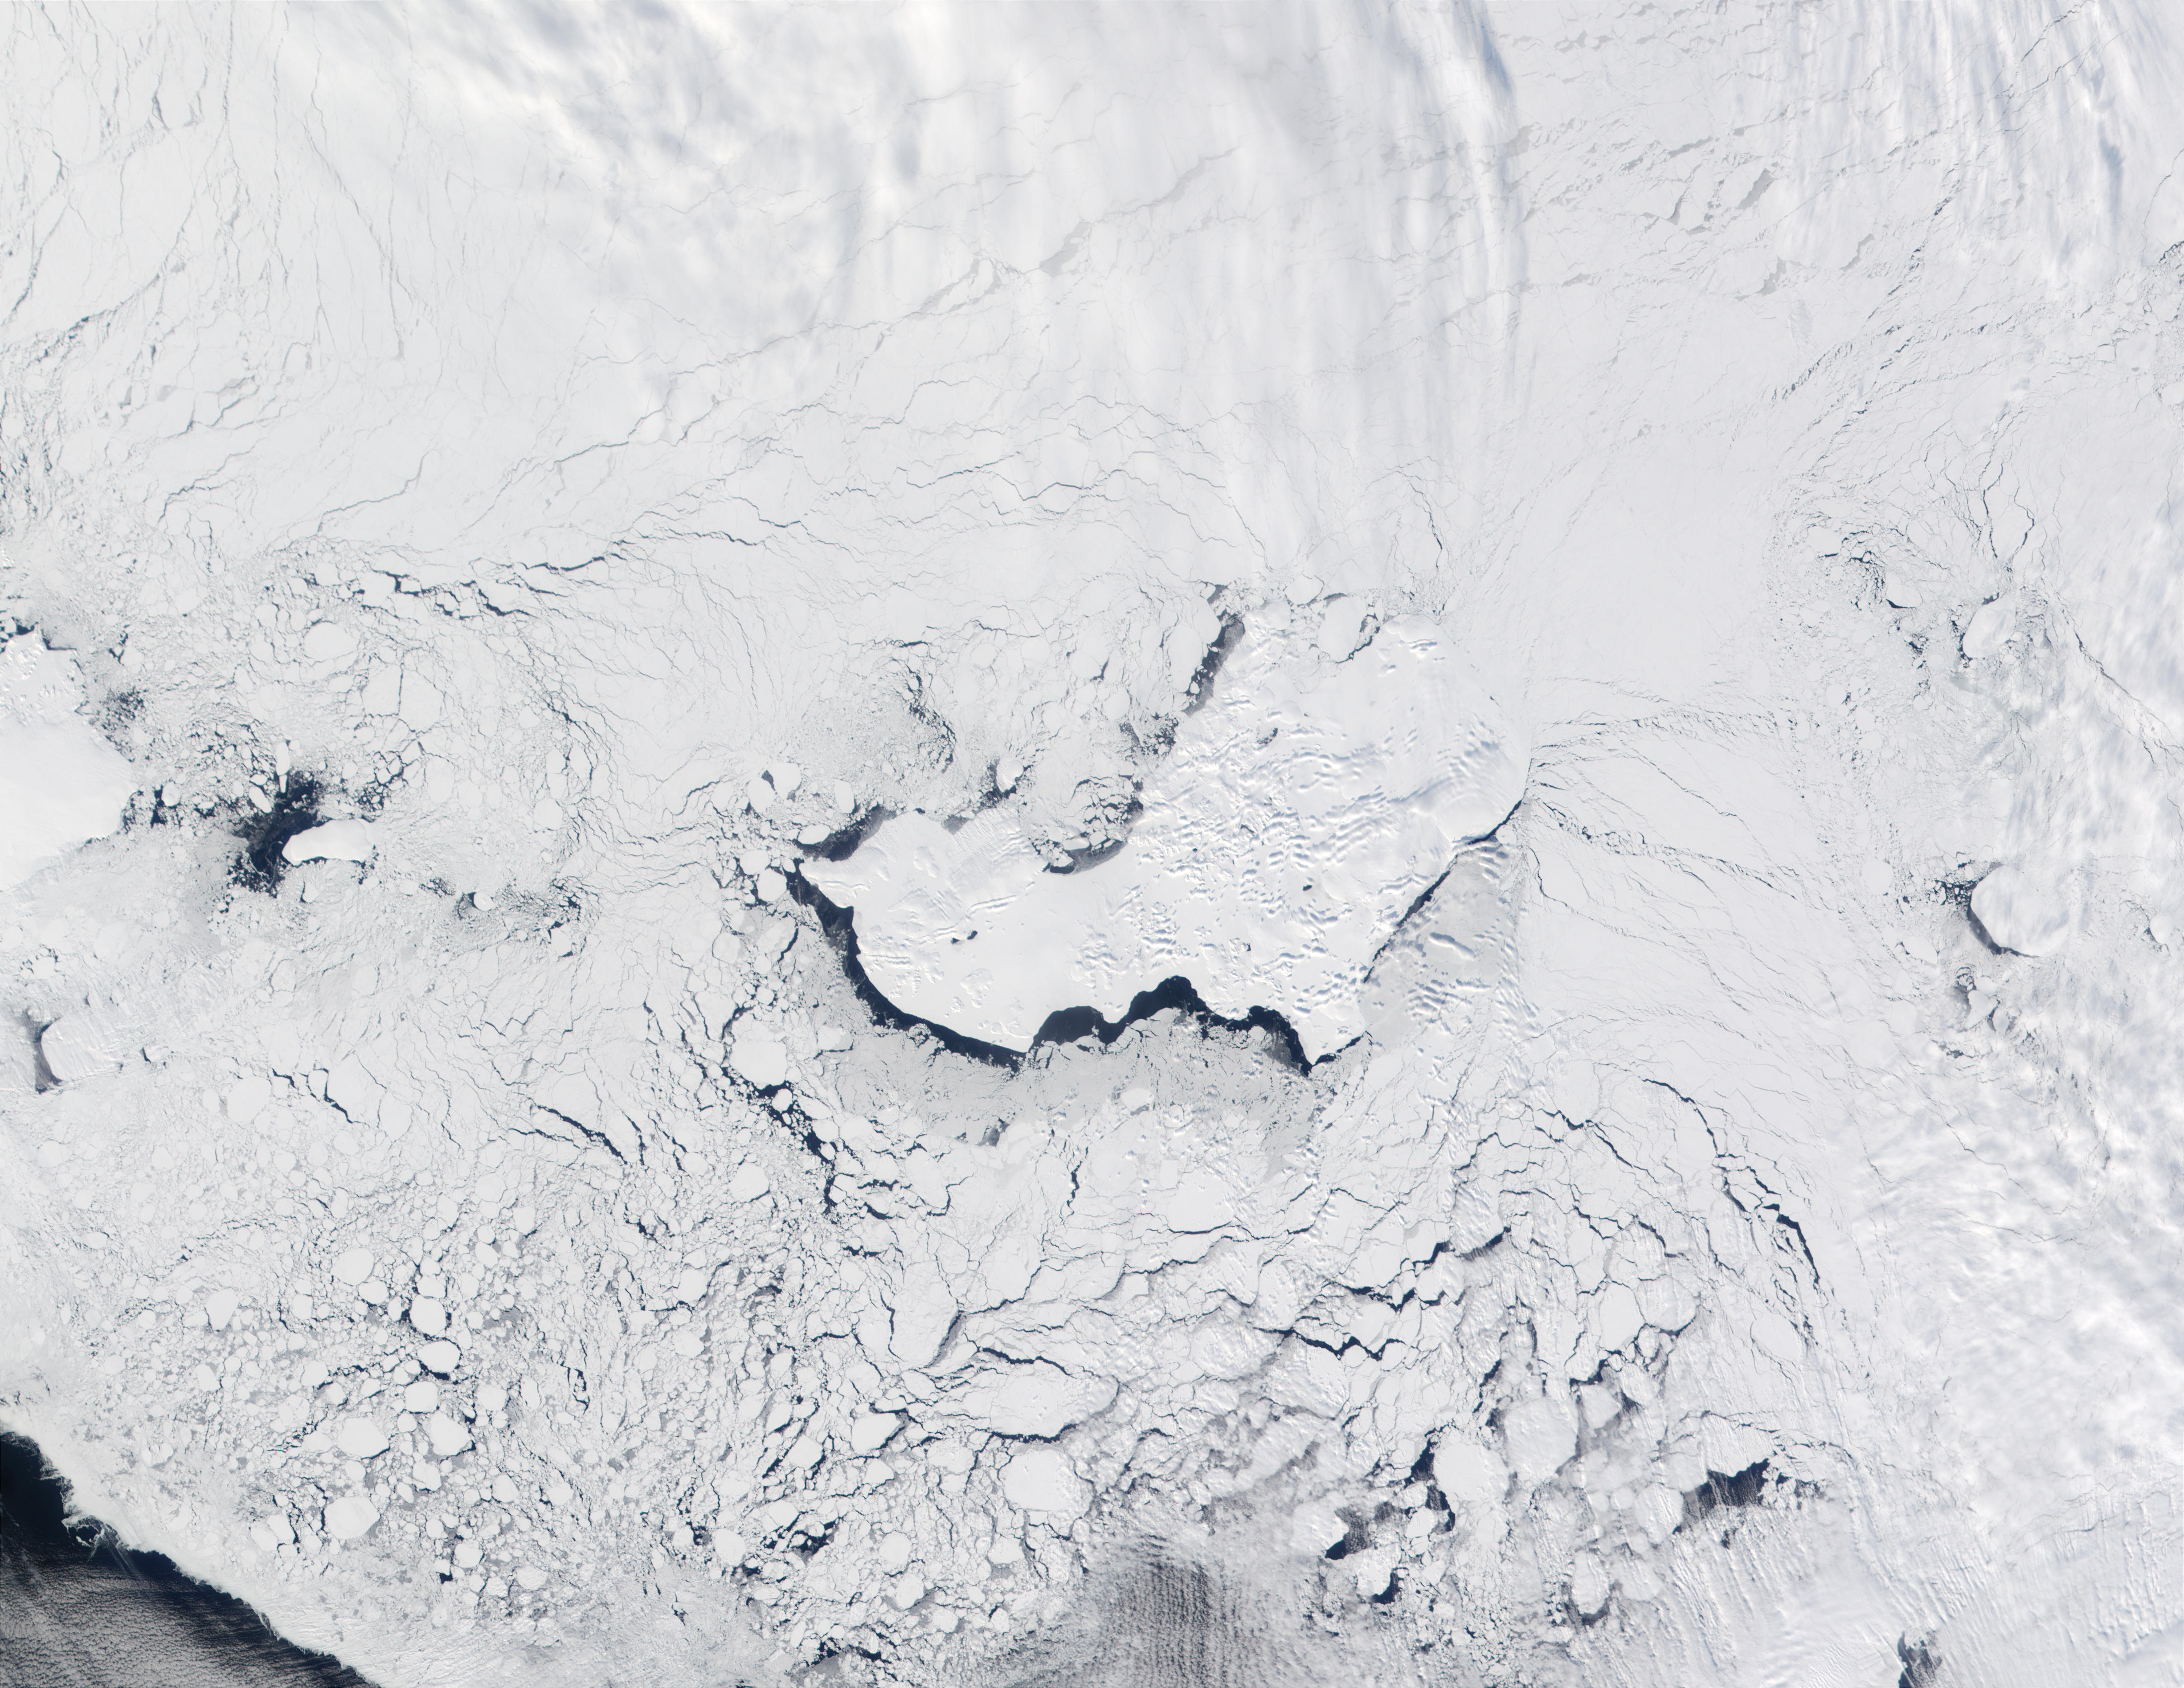 Franz Josef Land, Arctic Ocean - related image preview